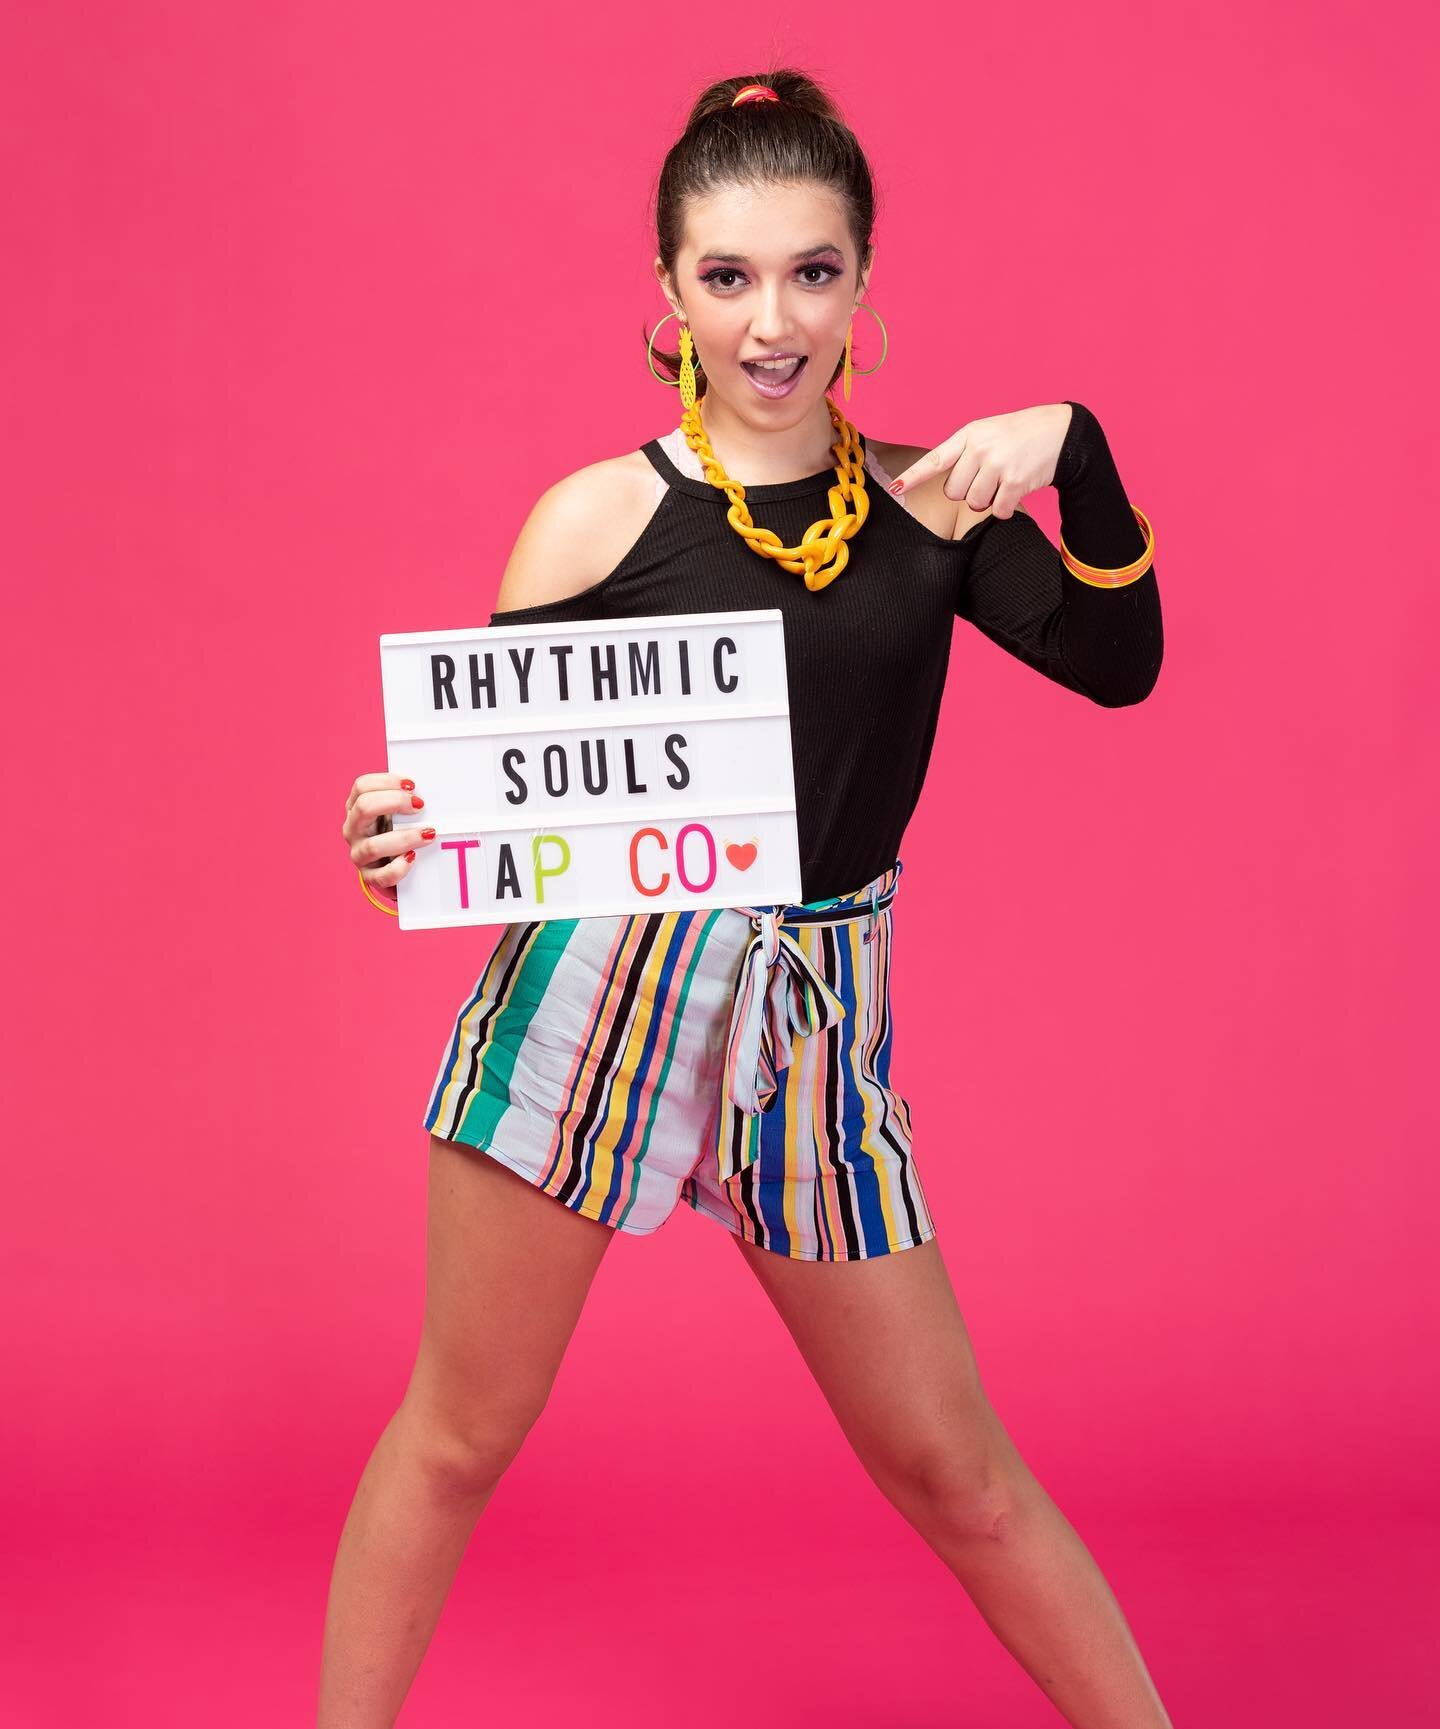 Wanna learn more about Rhythmic Souls Tap Company?! ⁣
⁣
Check our story to see all we have to offer! And don&rsquo;t forget to register for our #free master tap class Saturday, May 2! Link in bio. 😎⁣
⁣
#rhythmicsoulstapcompany #tapdance #dance #free